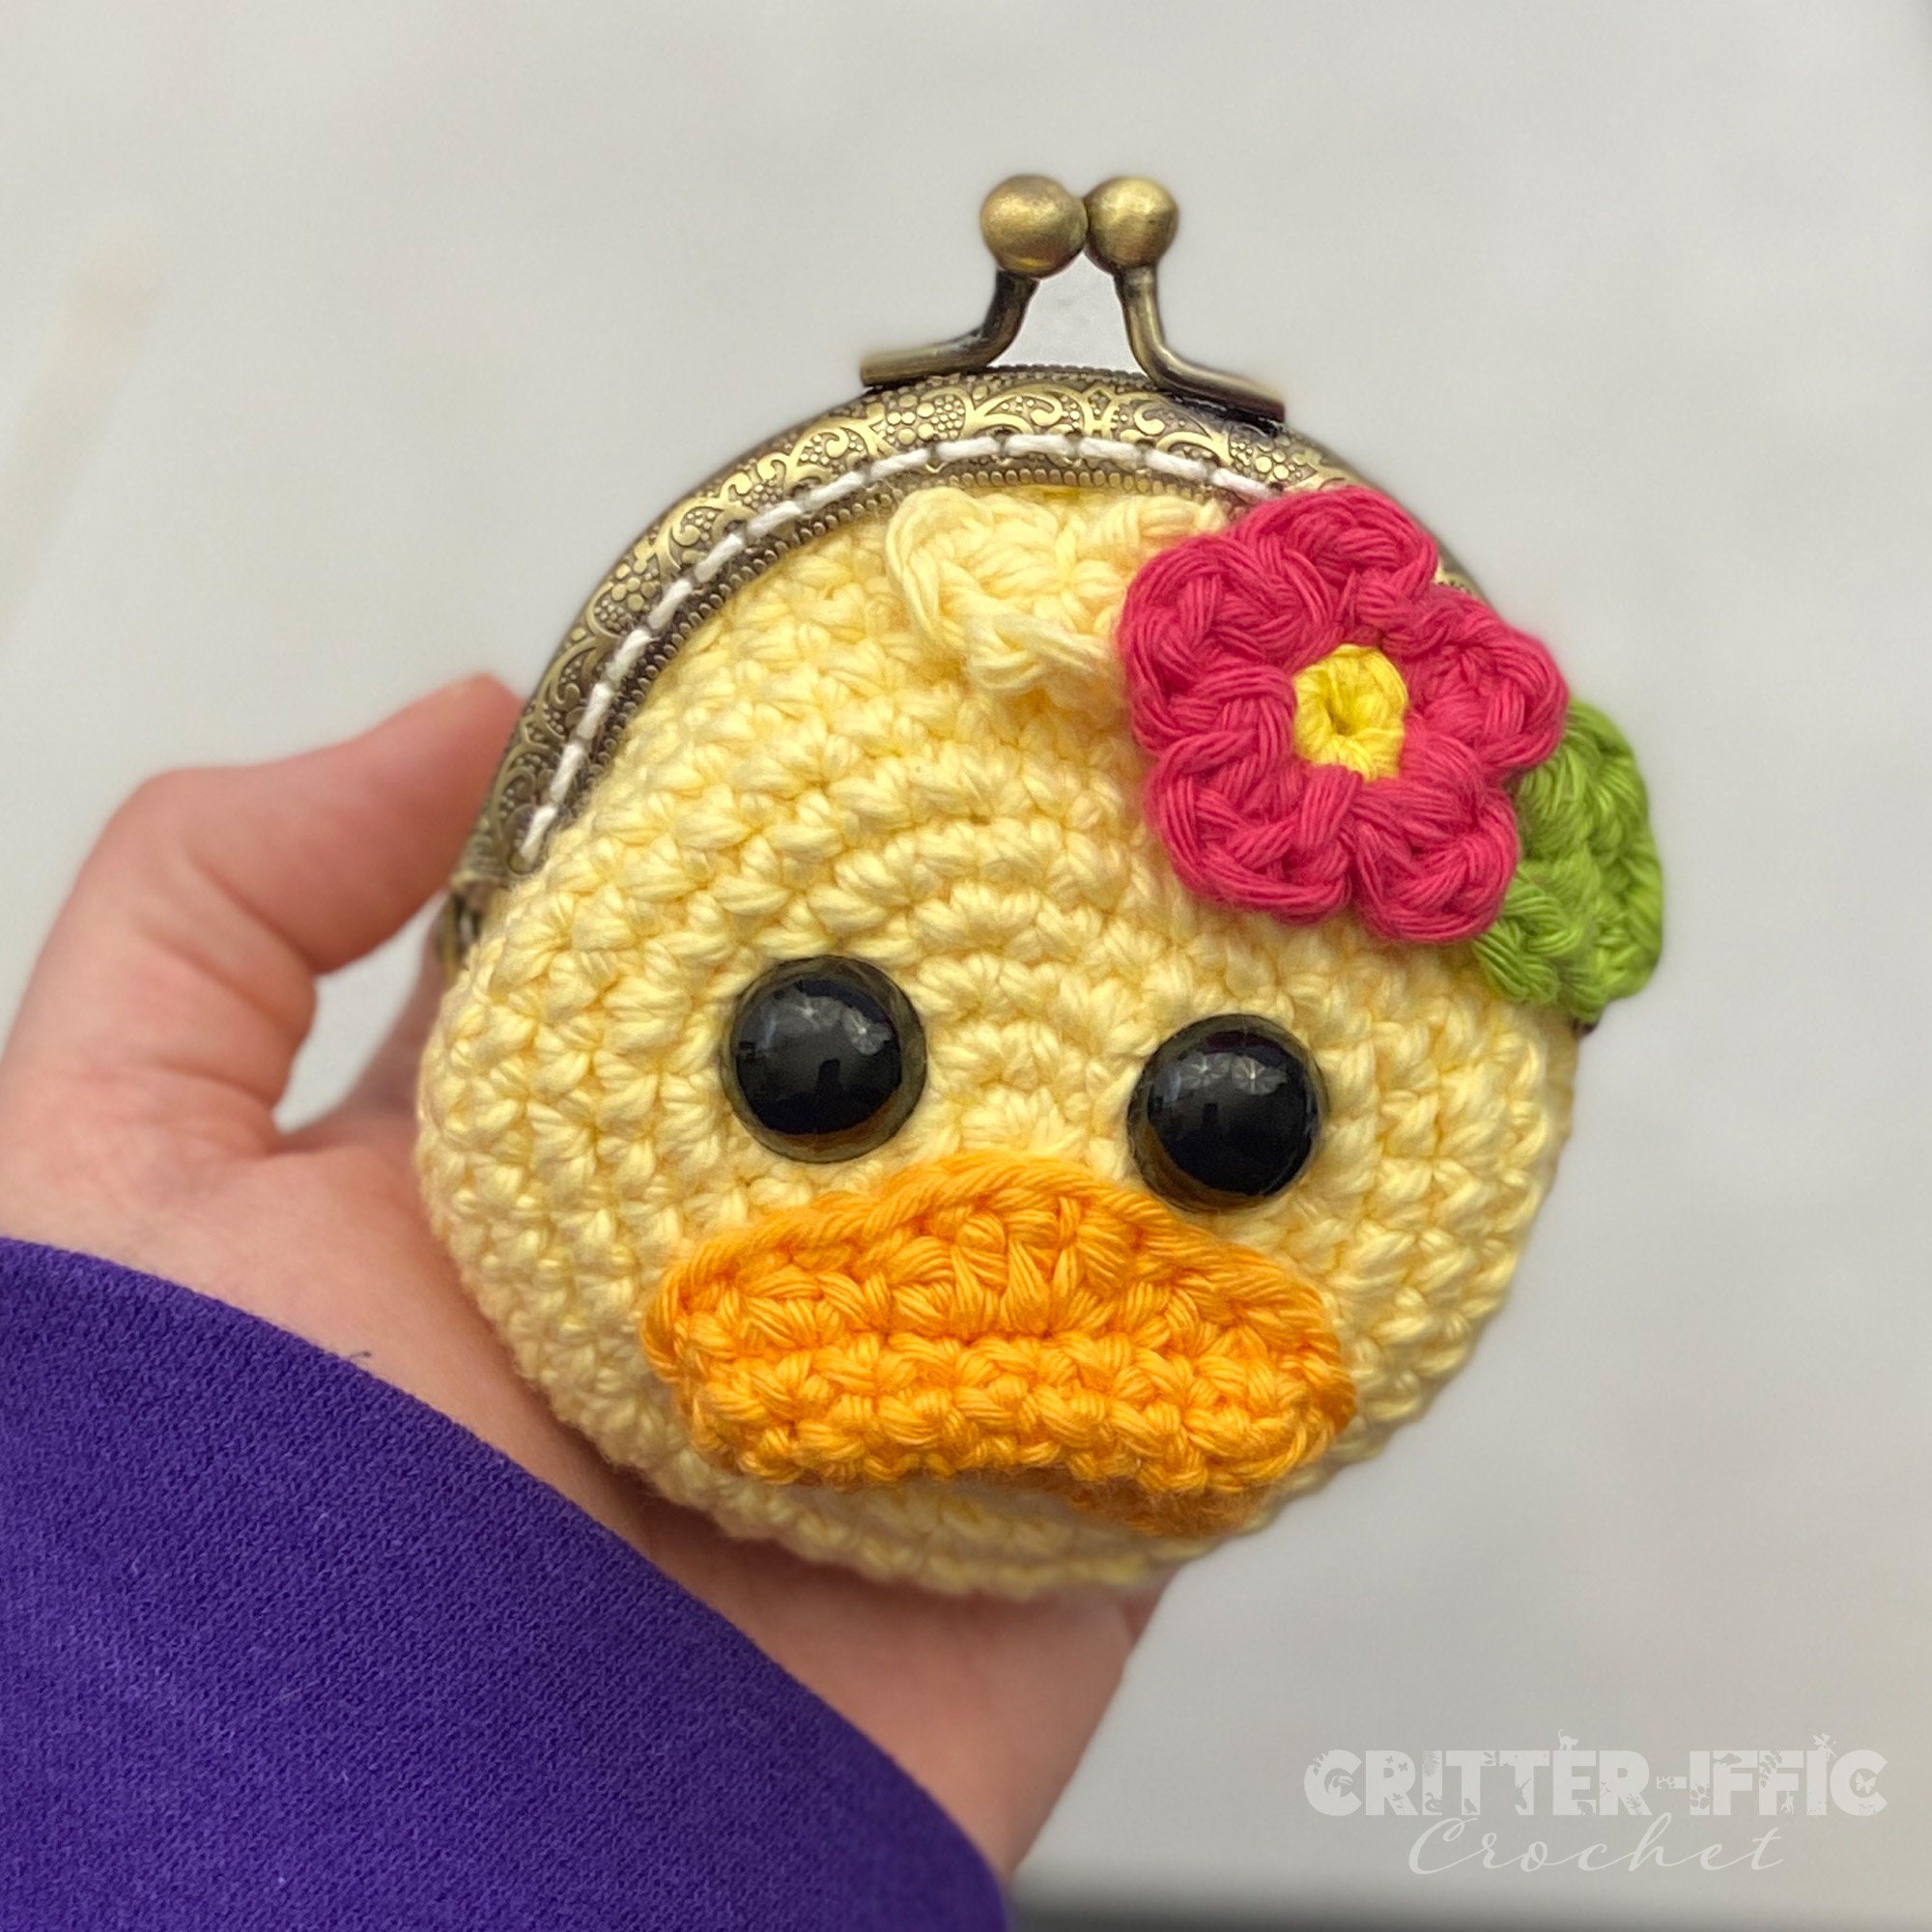 Yellow, silicone duck coin purse with clasp opening • Dimensions